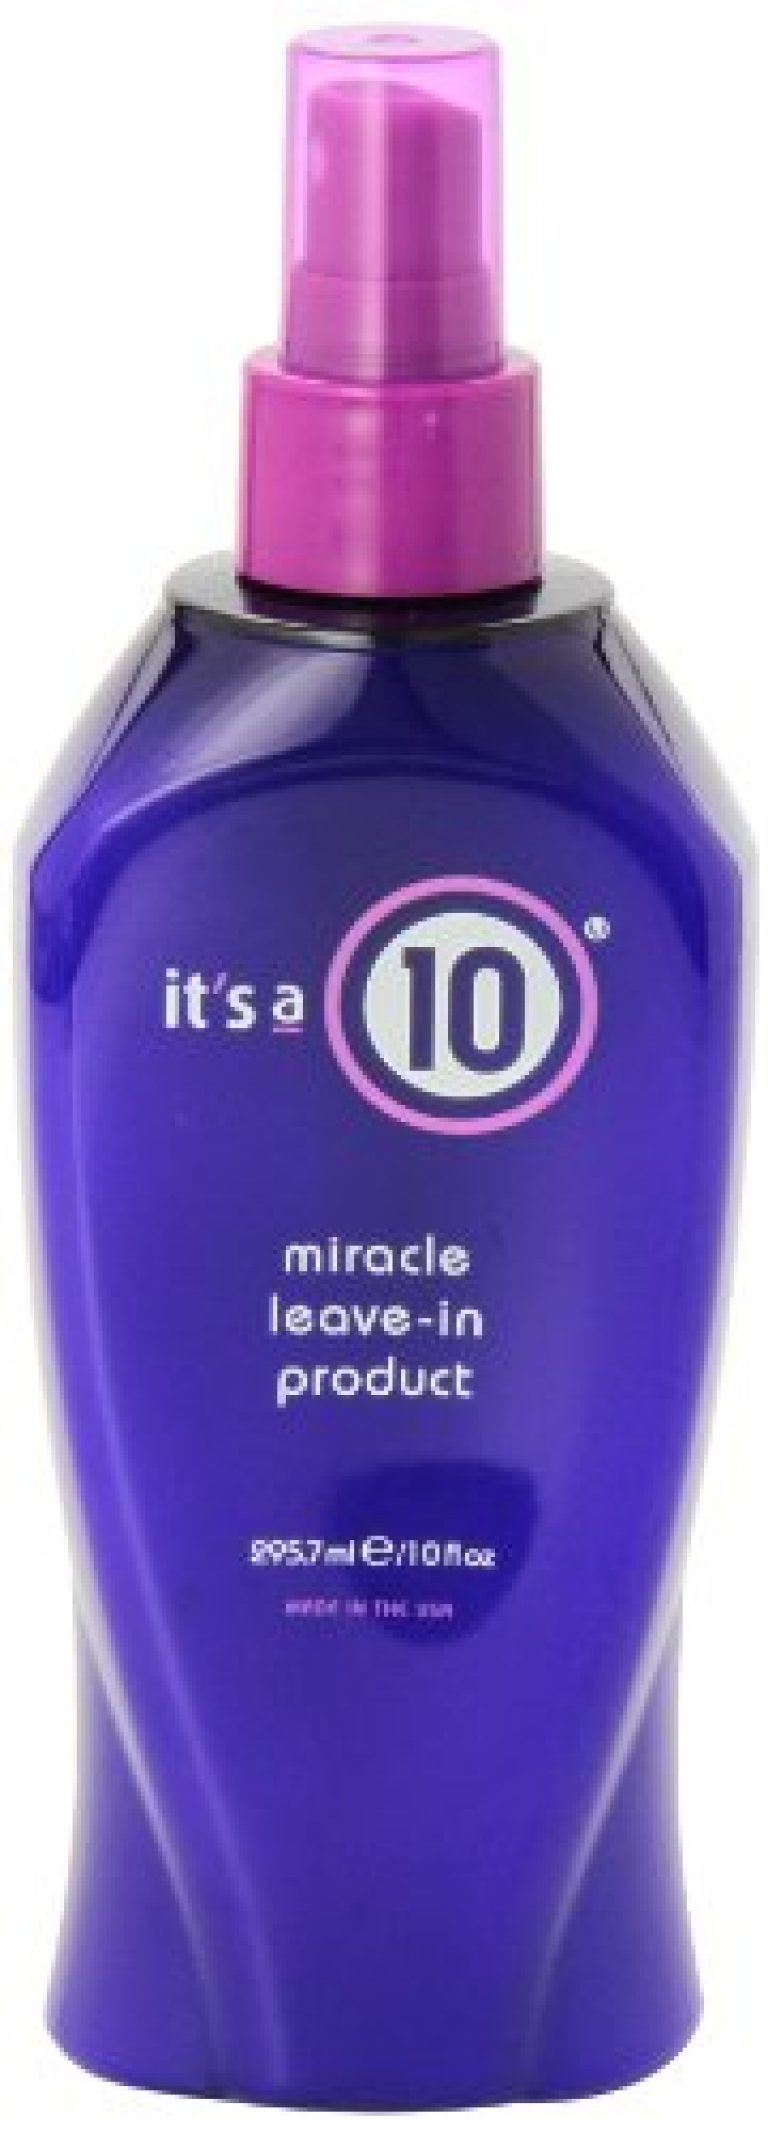 It's A 10 Haircare Miracle Leave-In Conditioner Spray - 10 oz. - 1ct 3